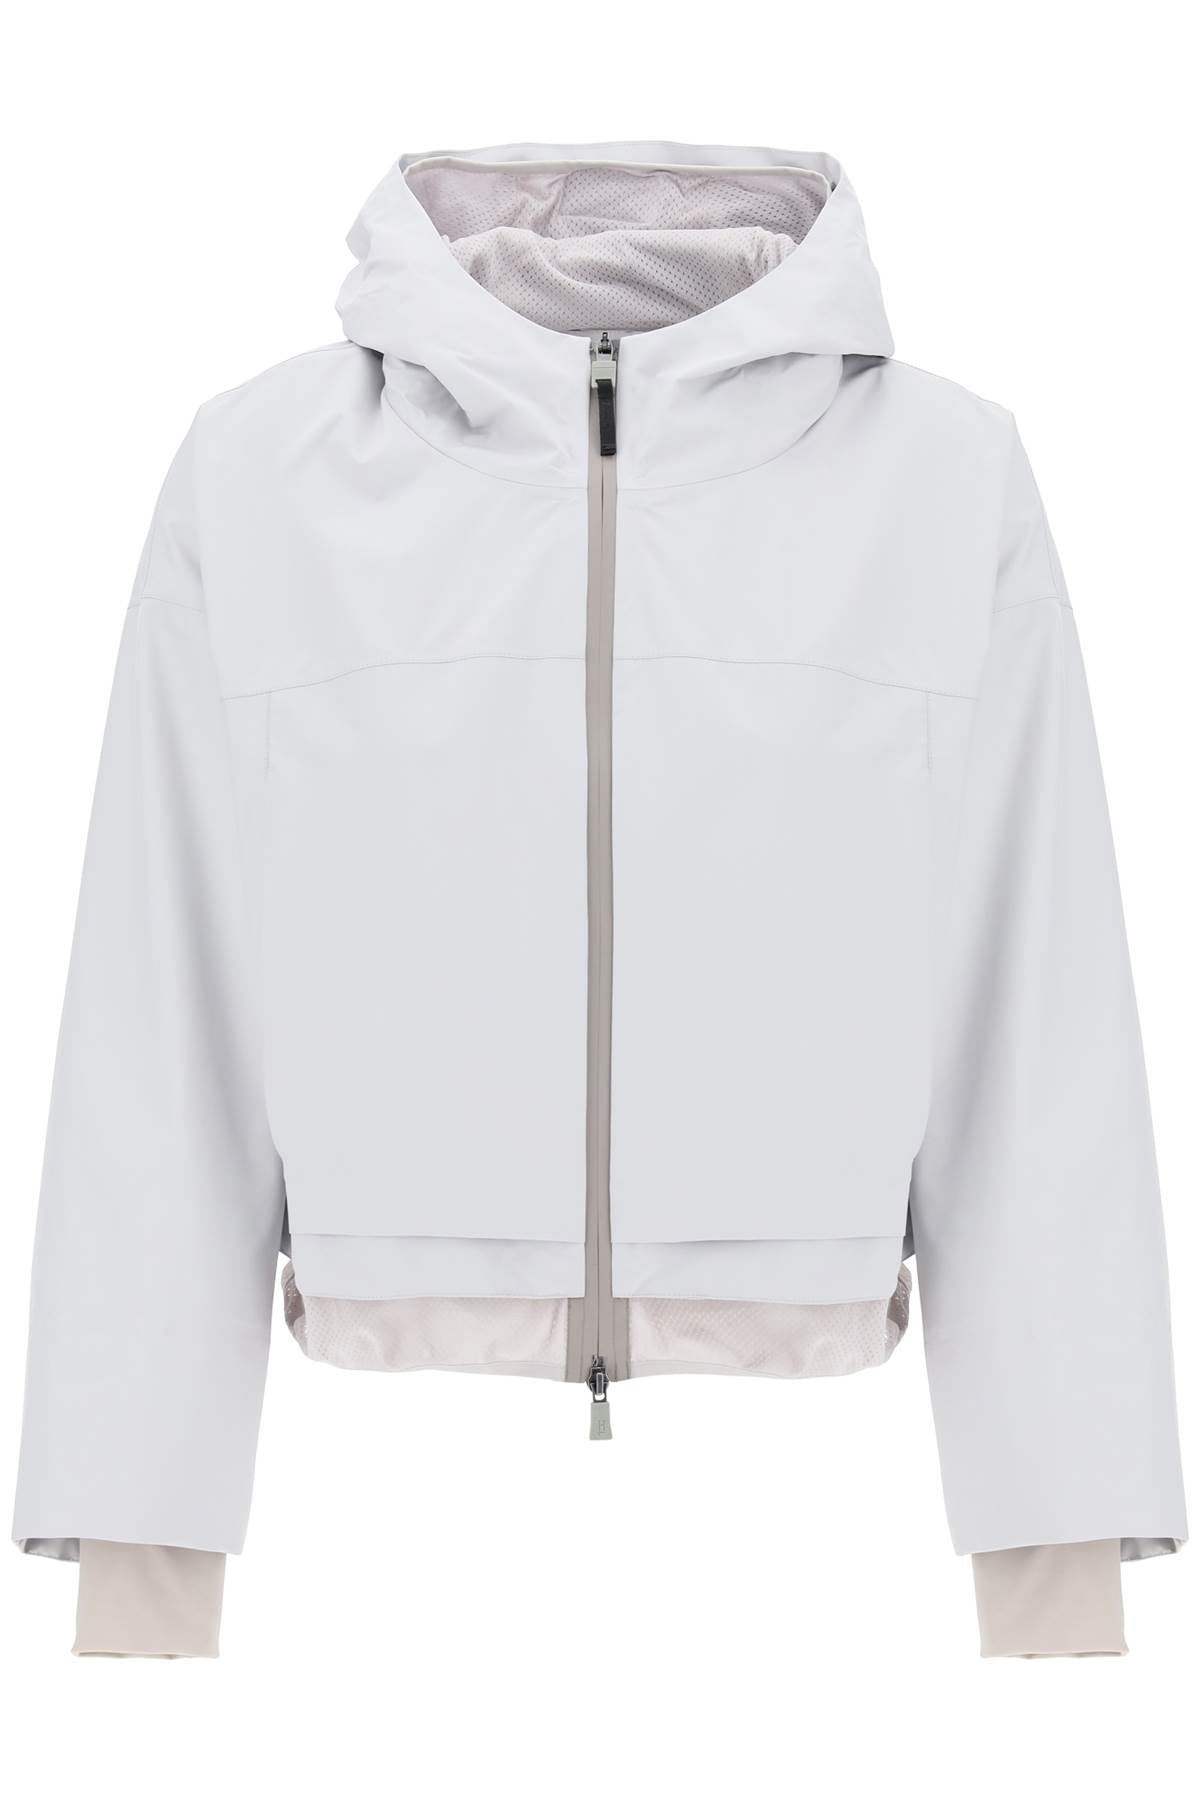 HERNO Grey Hooded Jacket with Cappuccio for Women - Waterproof and Windproof